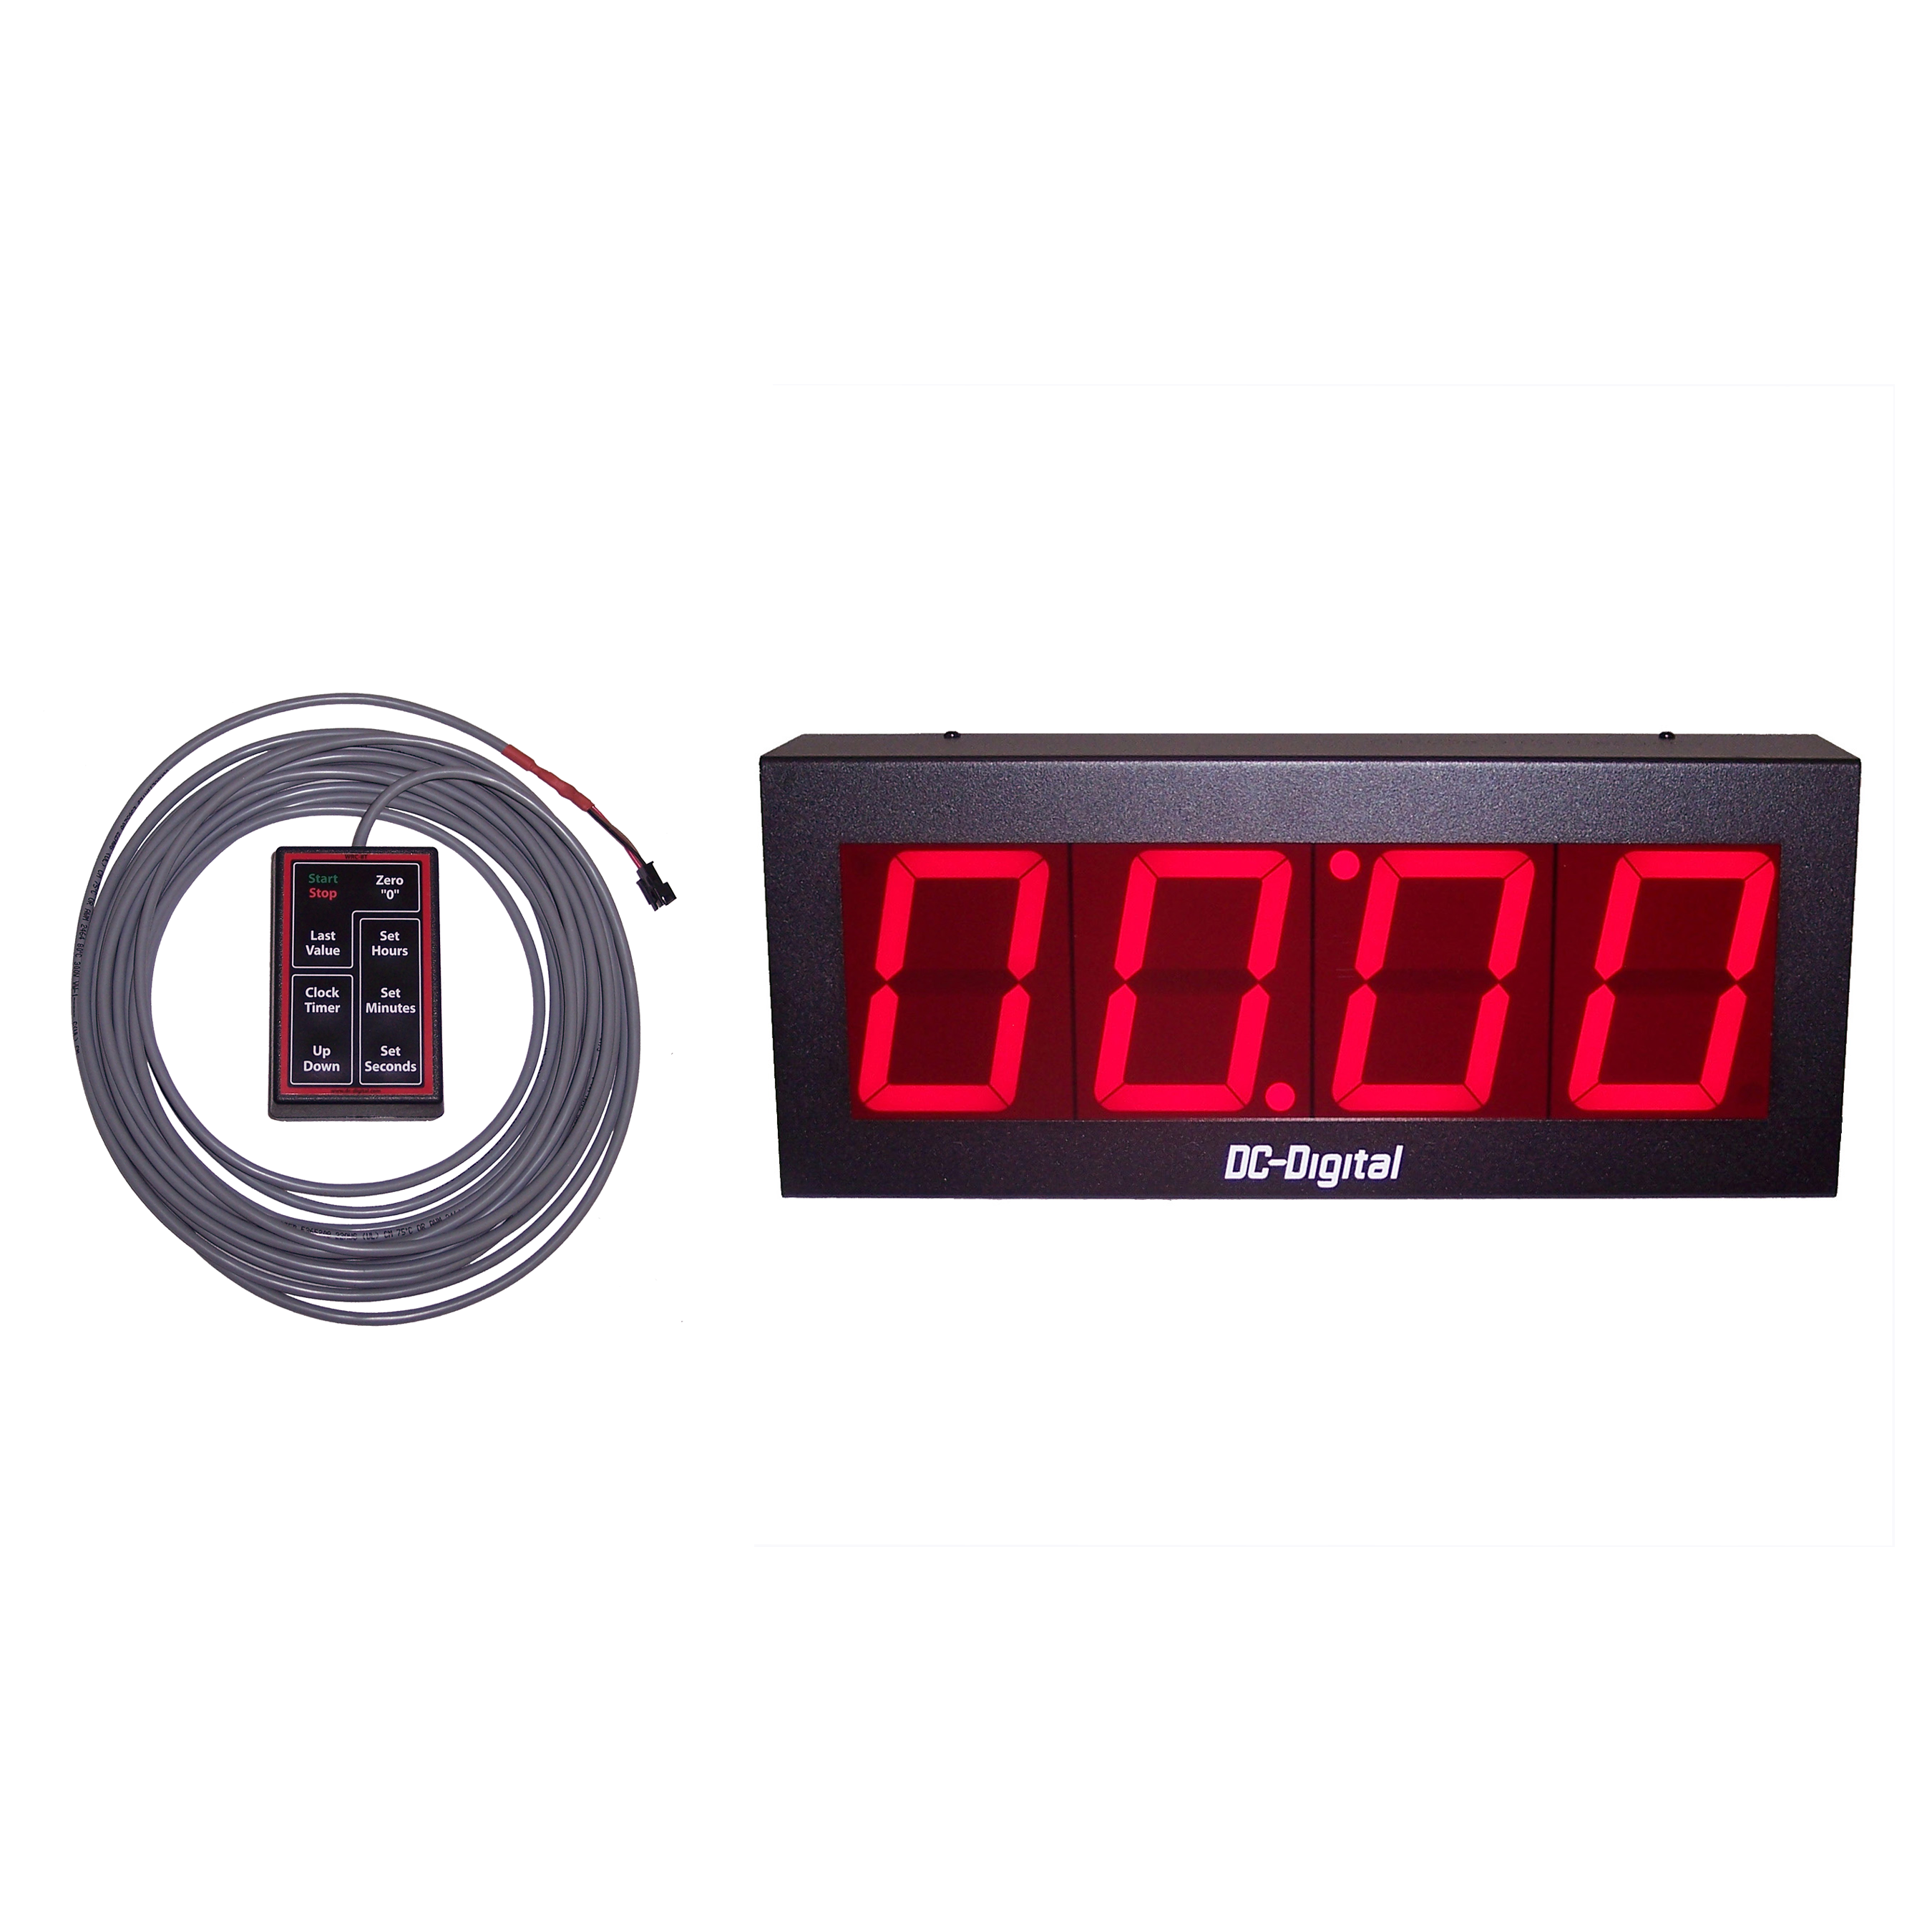 (DC-40UT-WR) 4.0 Inch LED Digital, Multifunction, Wired Handheld Controlled, Count Up timer, Countdown Timer, Time of Day Clock